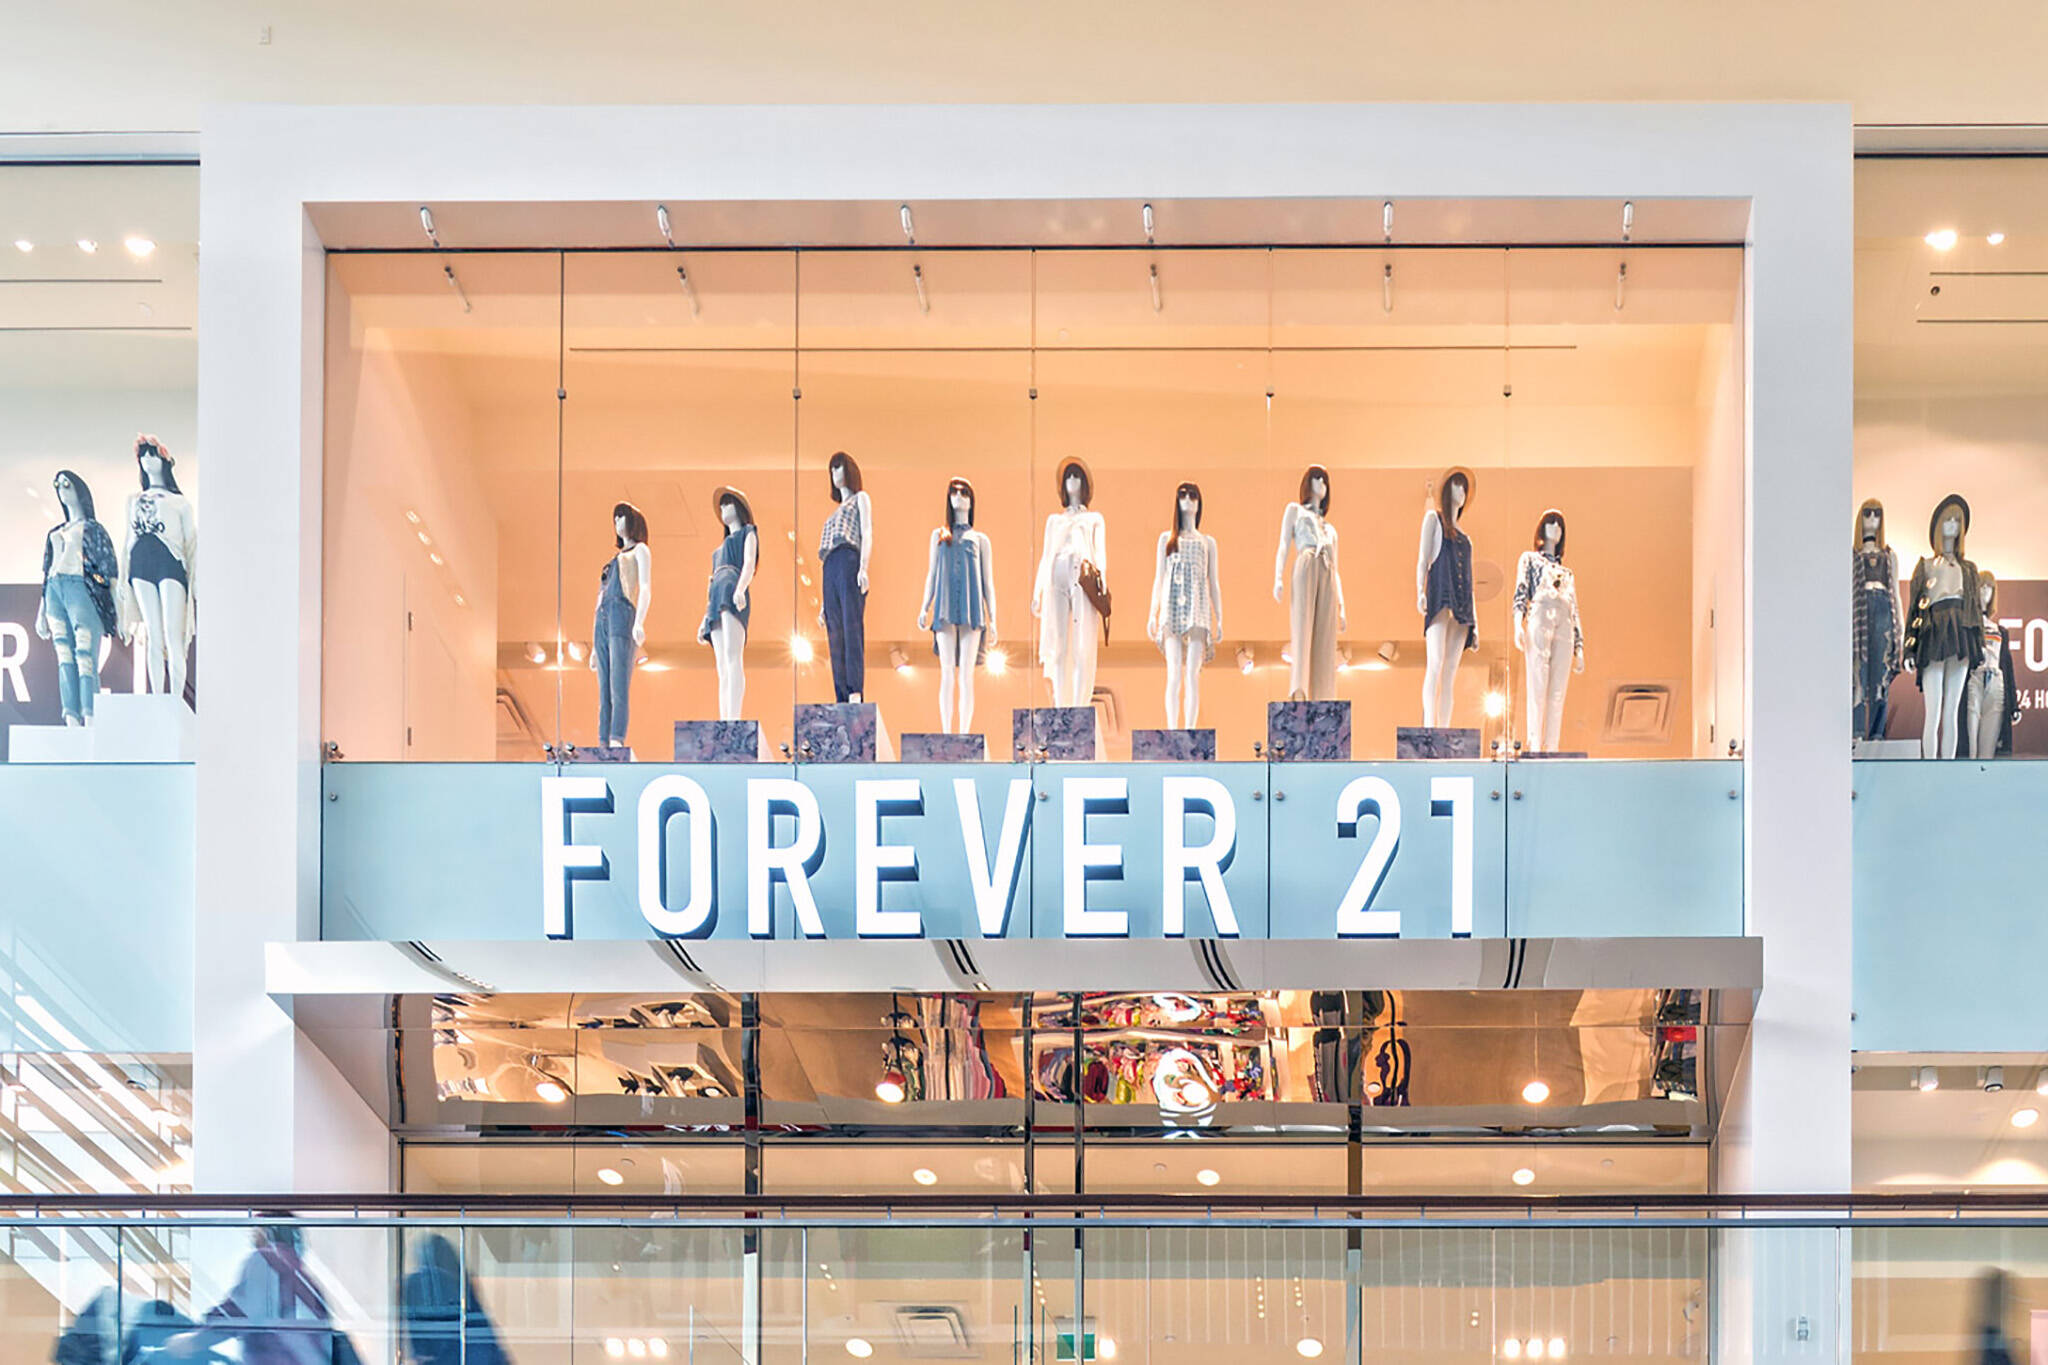 Forever 21: The Failed American Dream